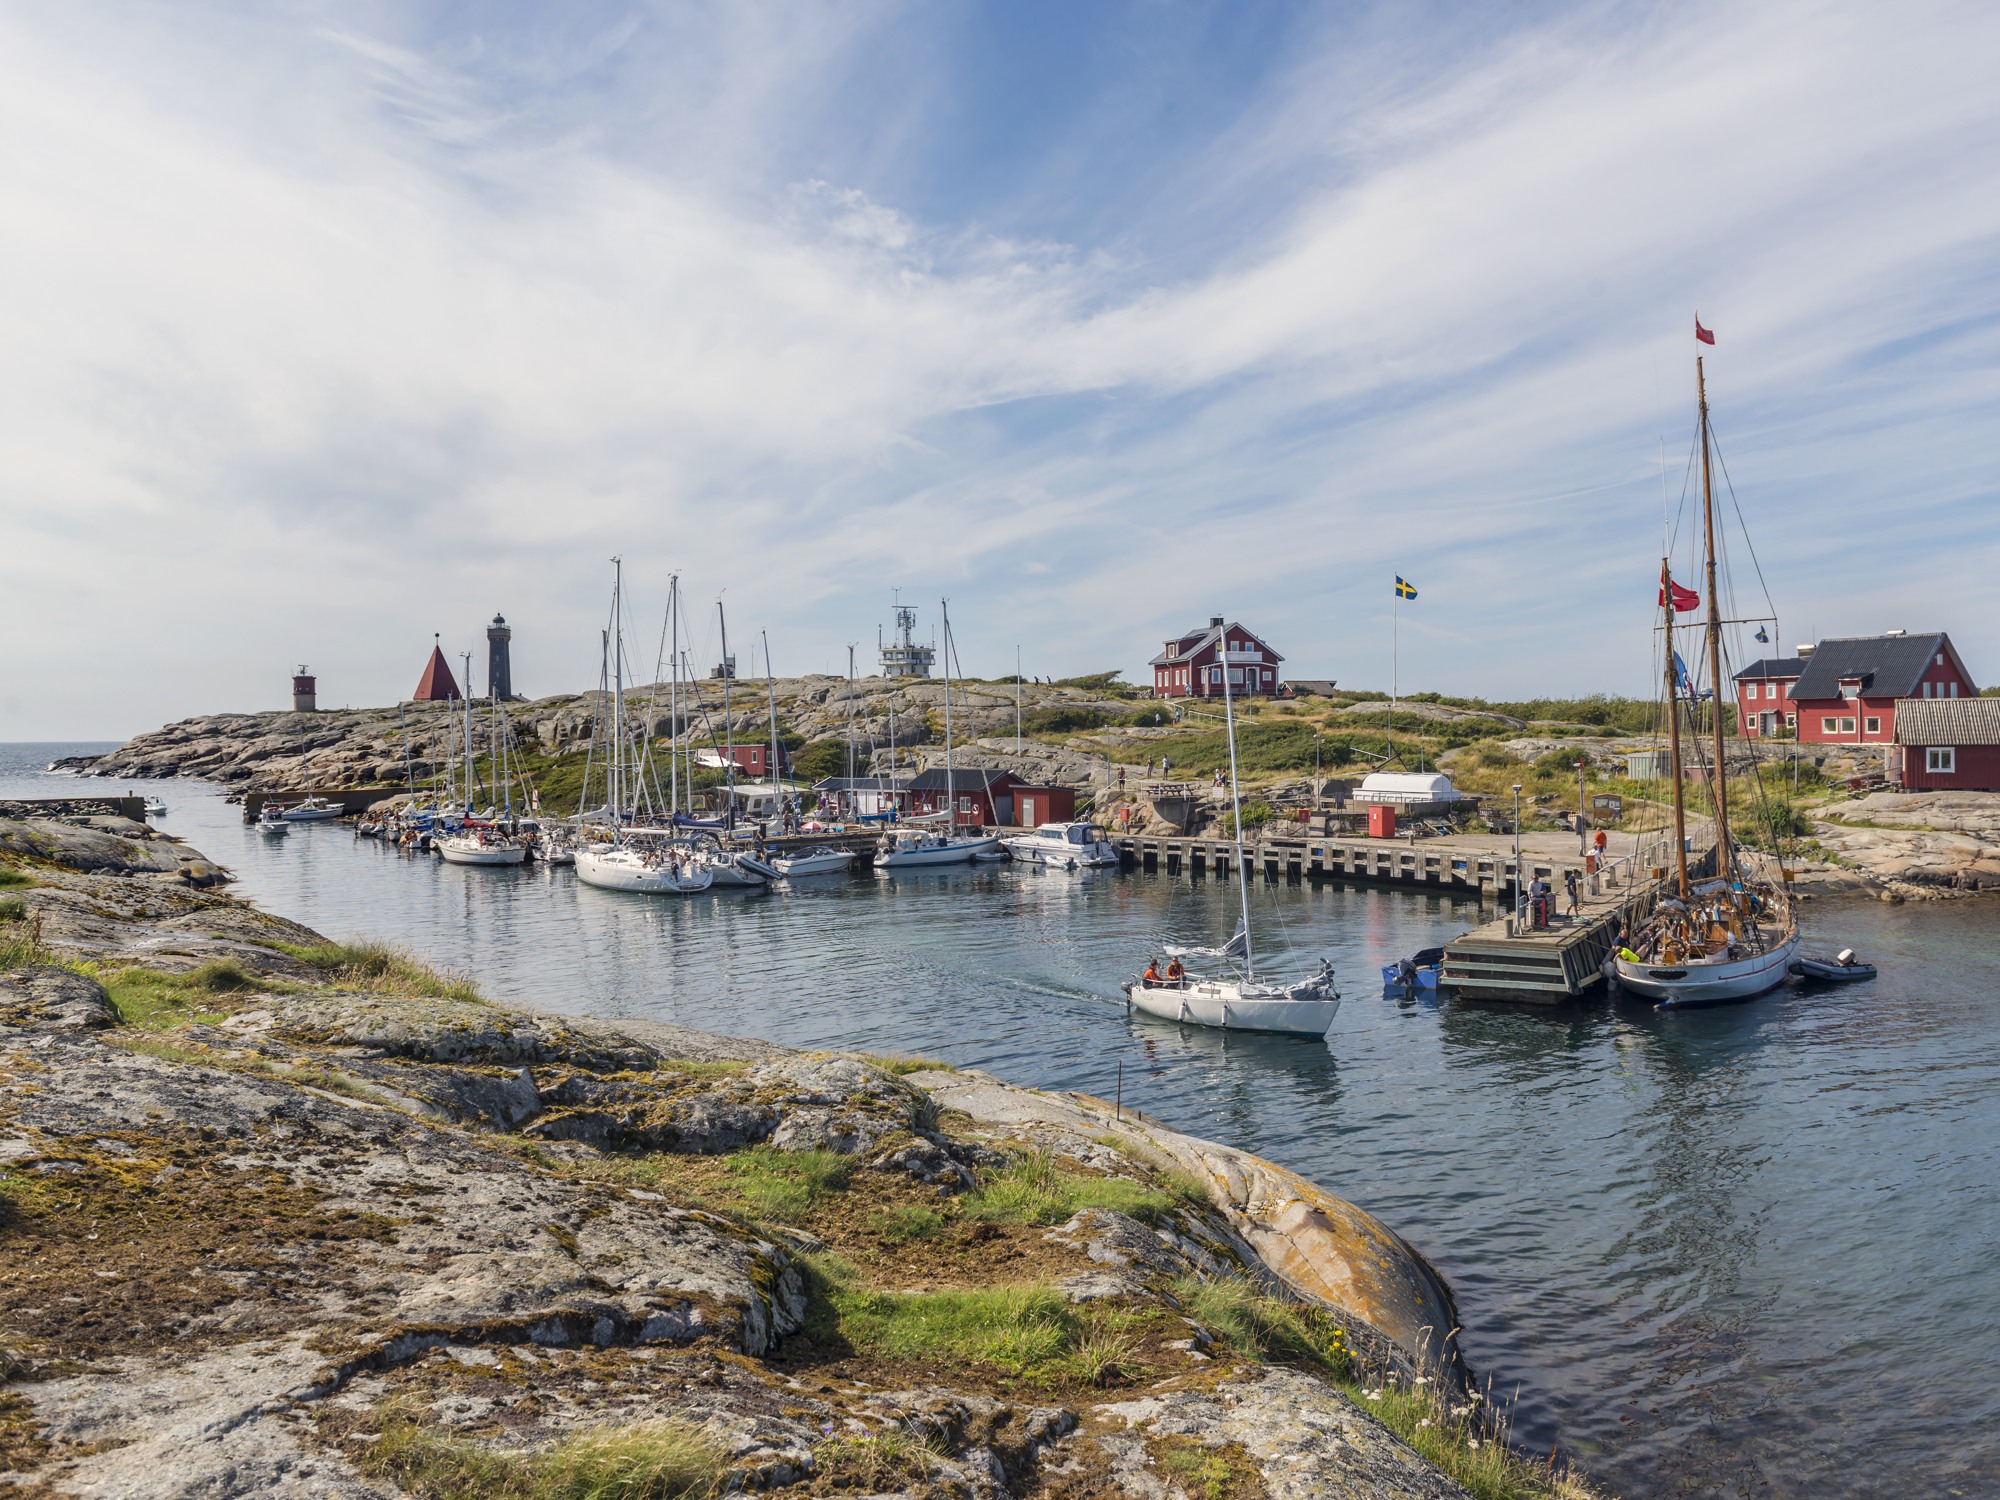 The harbour at the island Vinga in the Gothenburg archipelago.